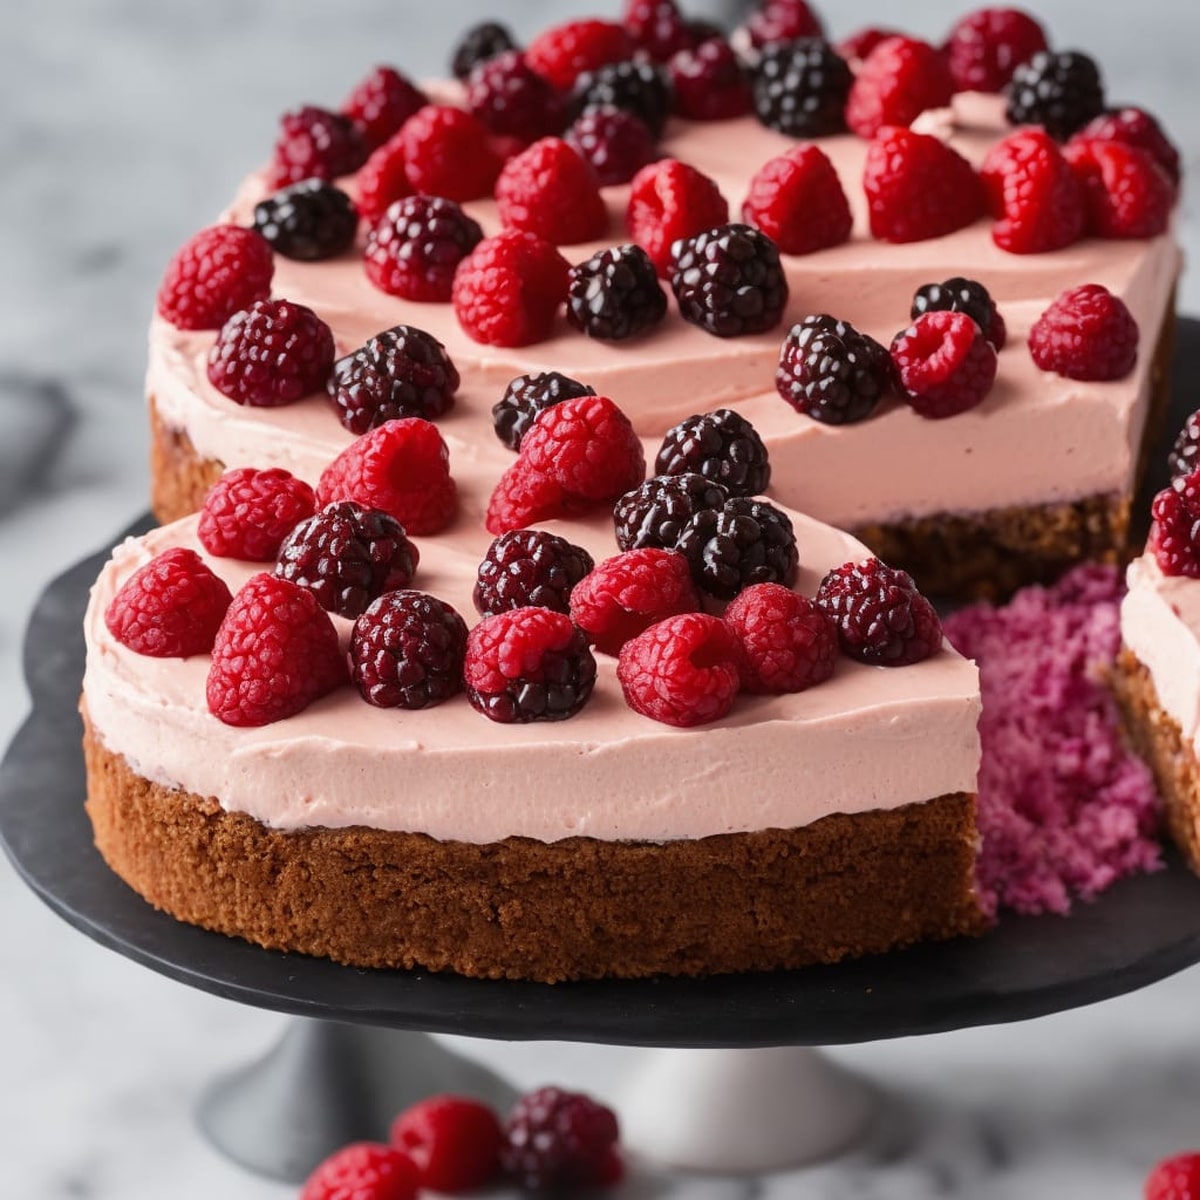 Iced berry mousse cake